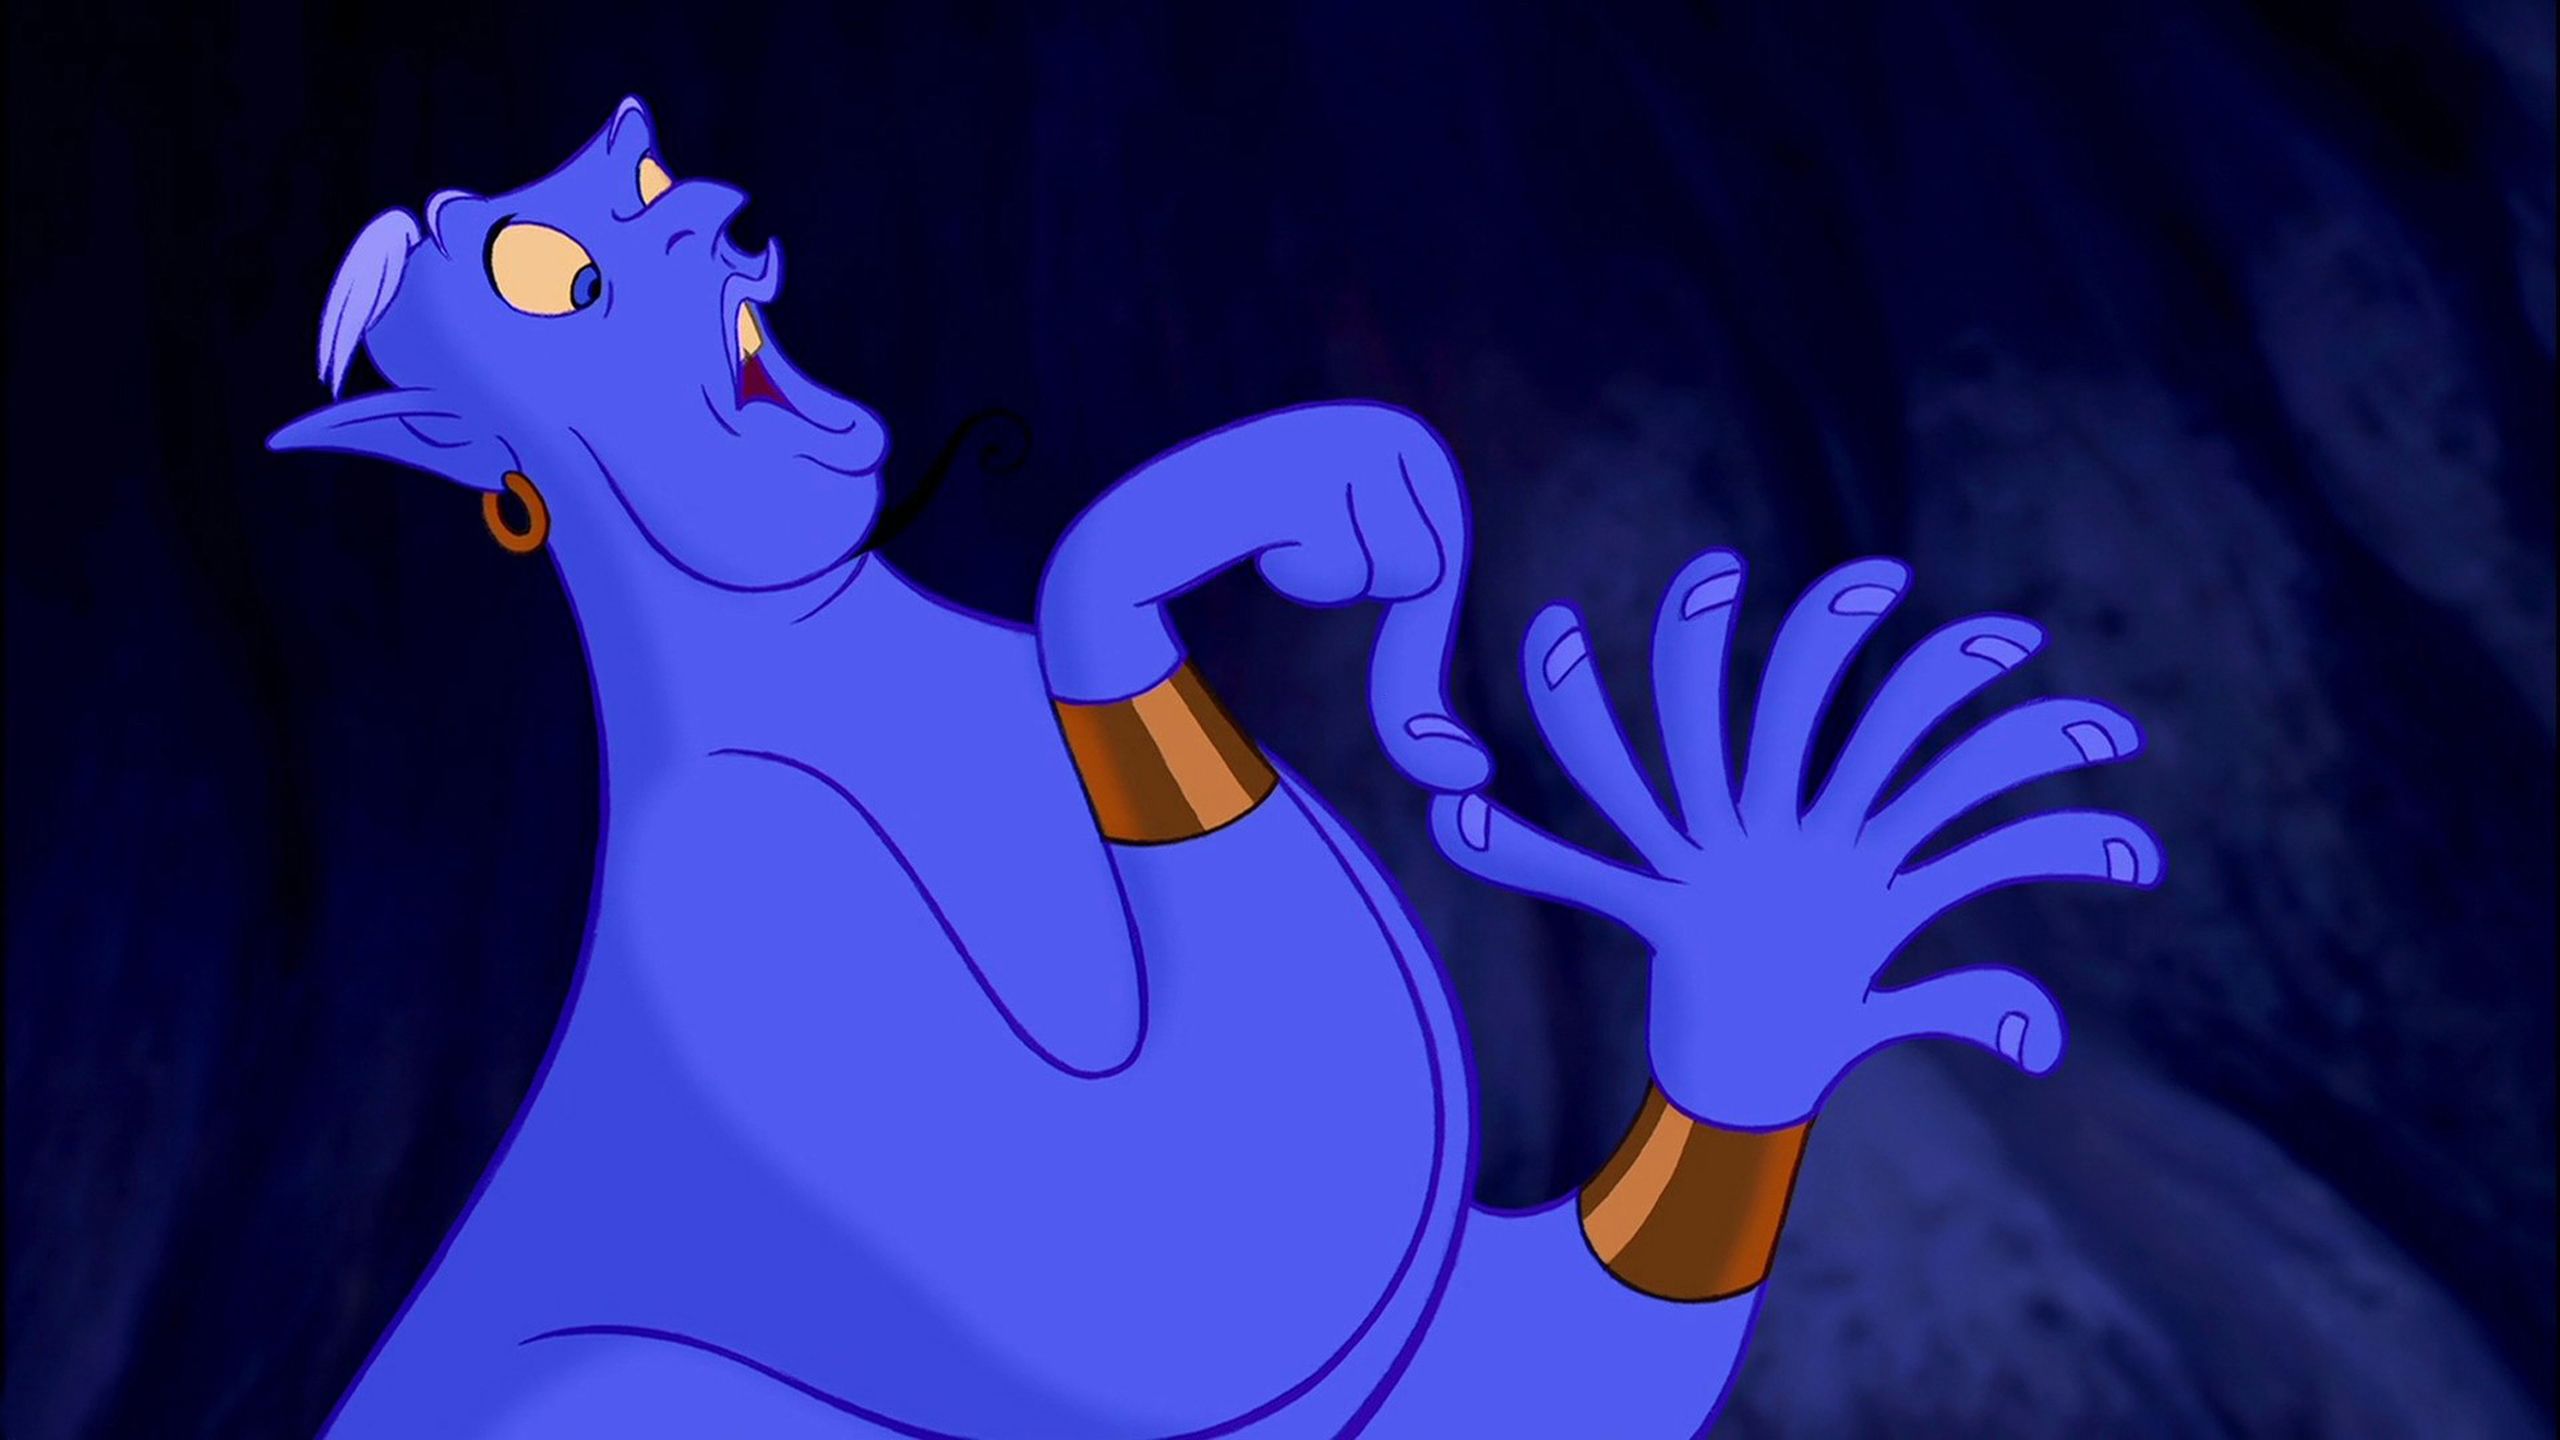 Aladdin Genie Counting On Your Fingers Wallpaper HD 2560x1440, Wallpaper13.com